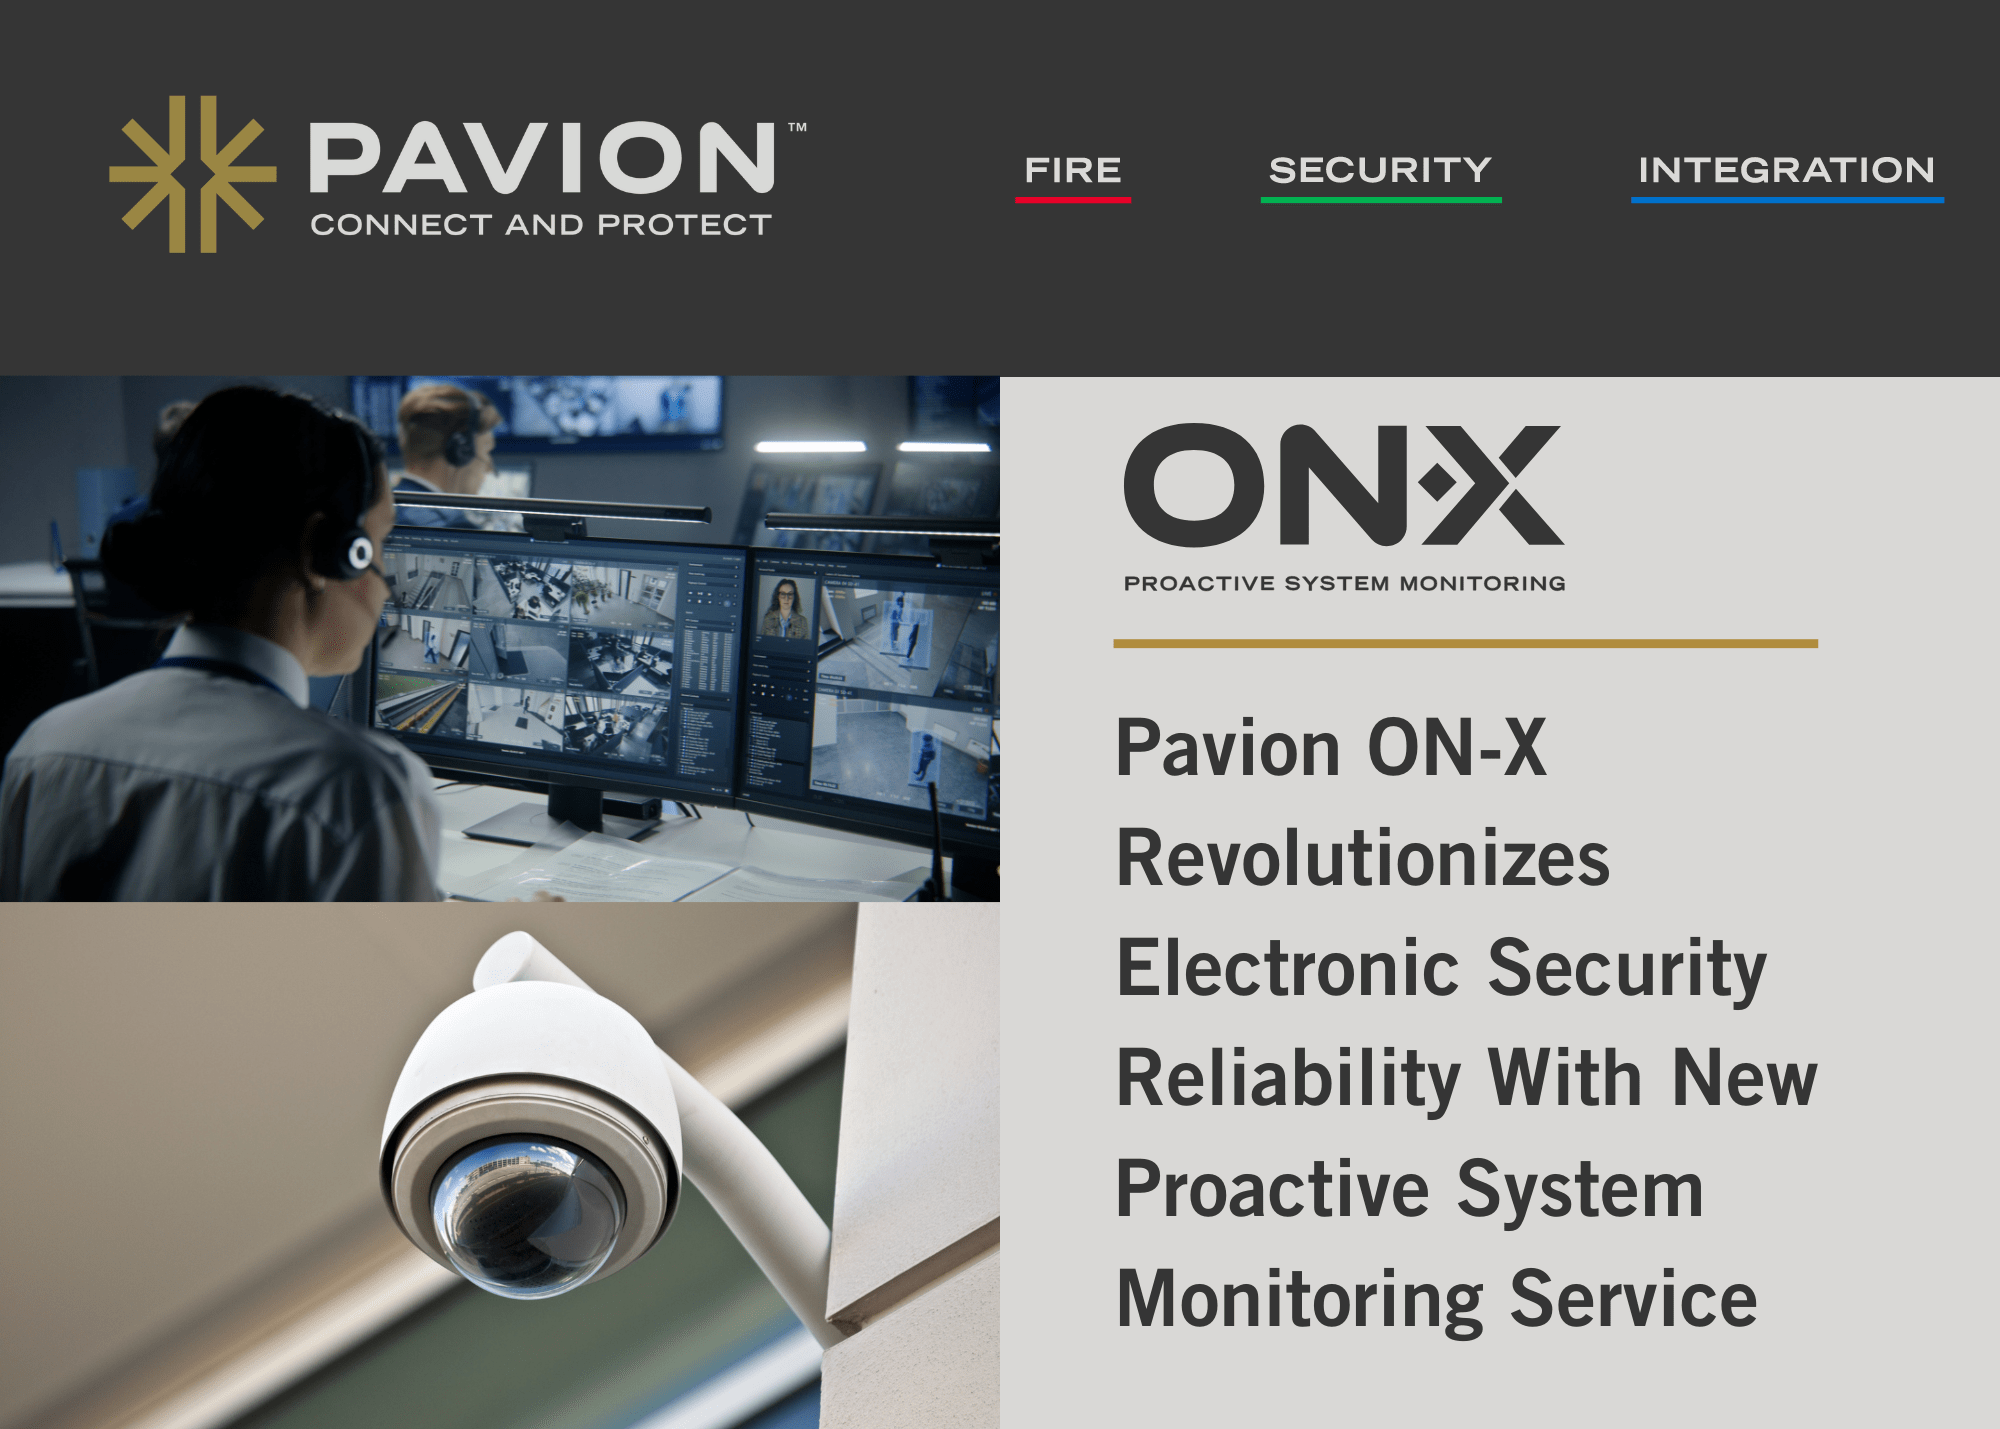 Introducing Pavion ON-X: Proactive System Monitoring